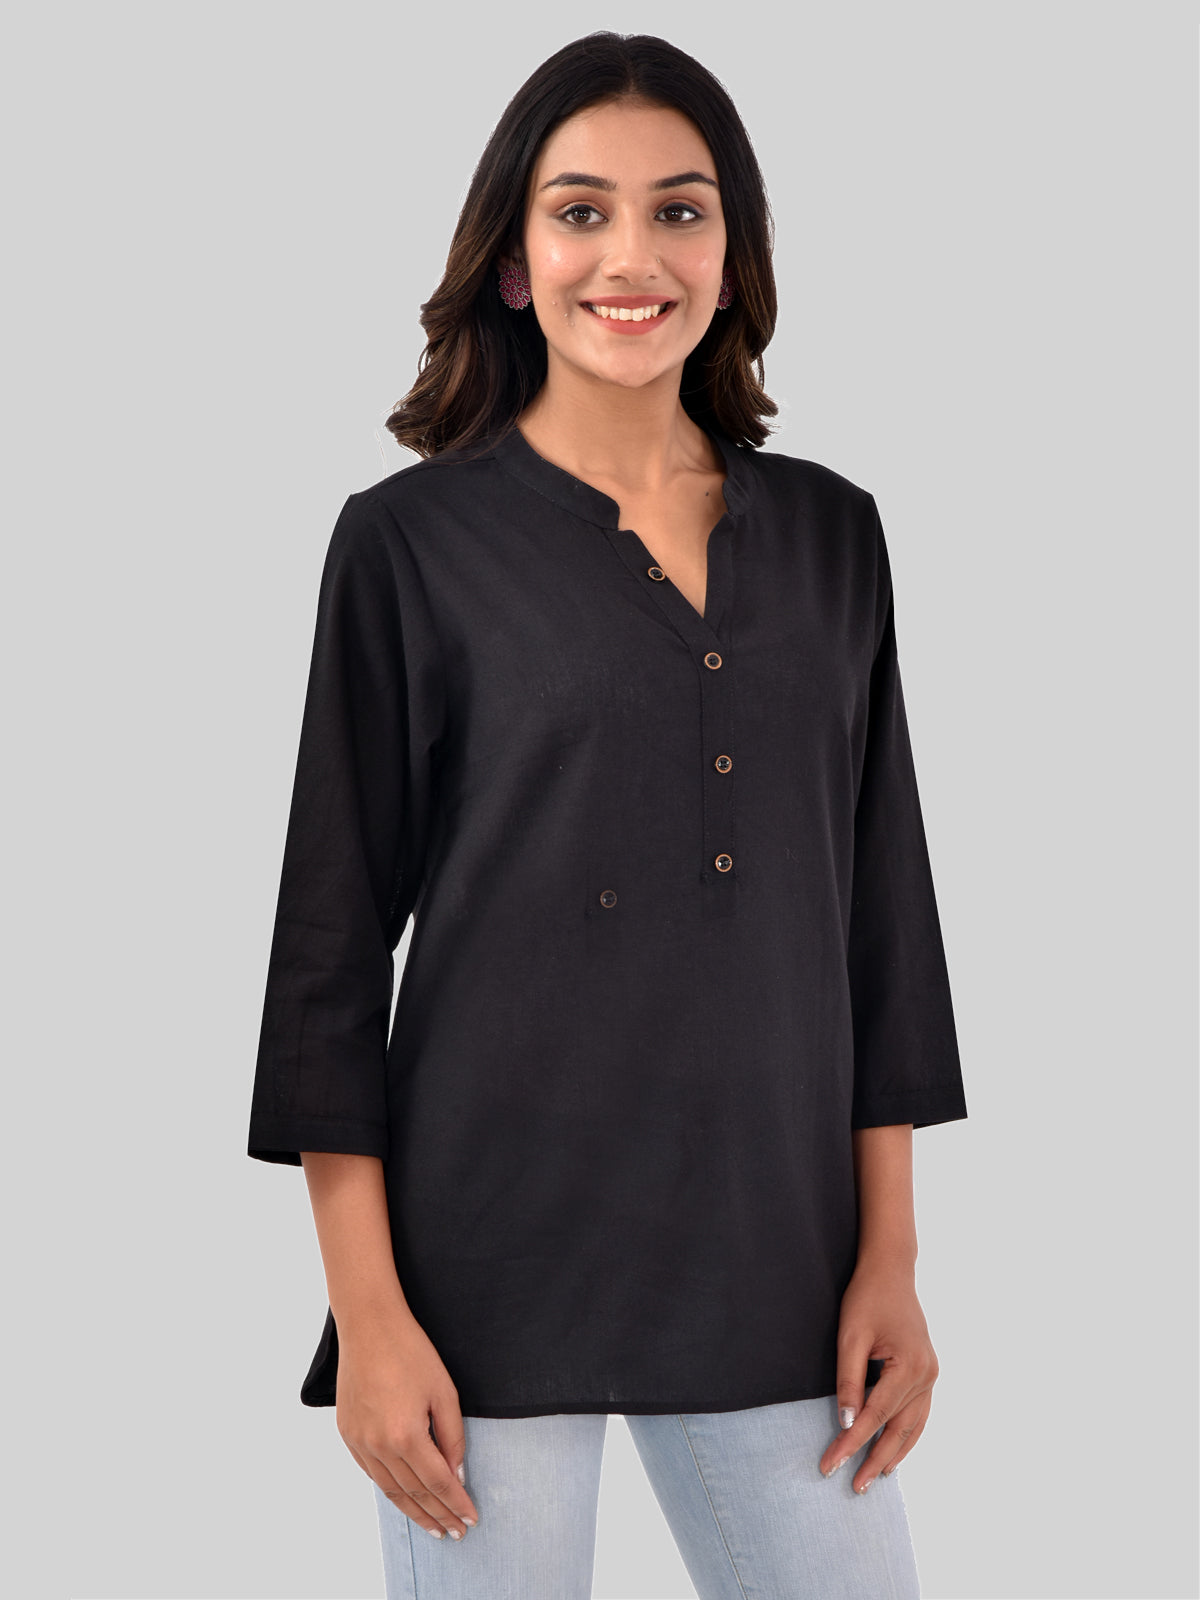 Womens Casual Three Fourth Sleeves Solid Black Cotton Tops